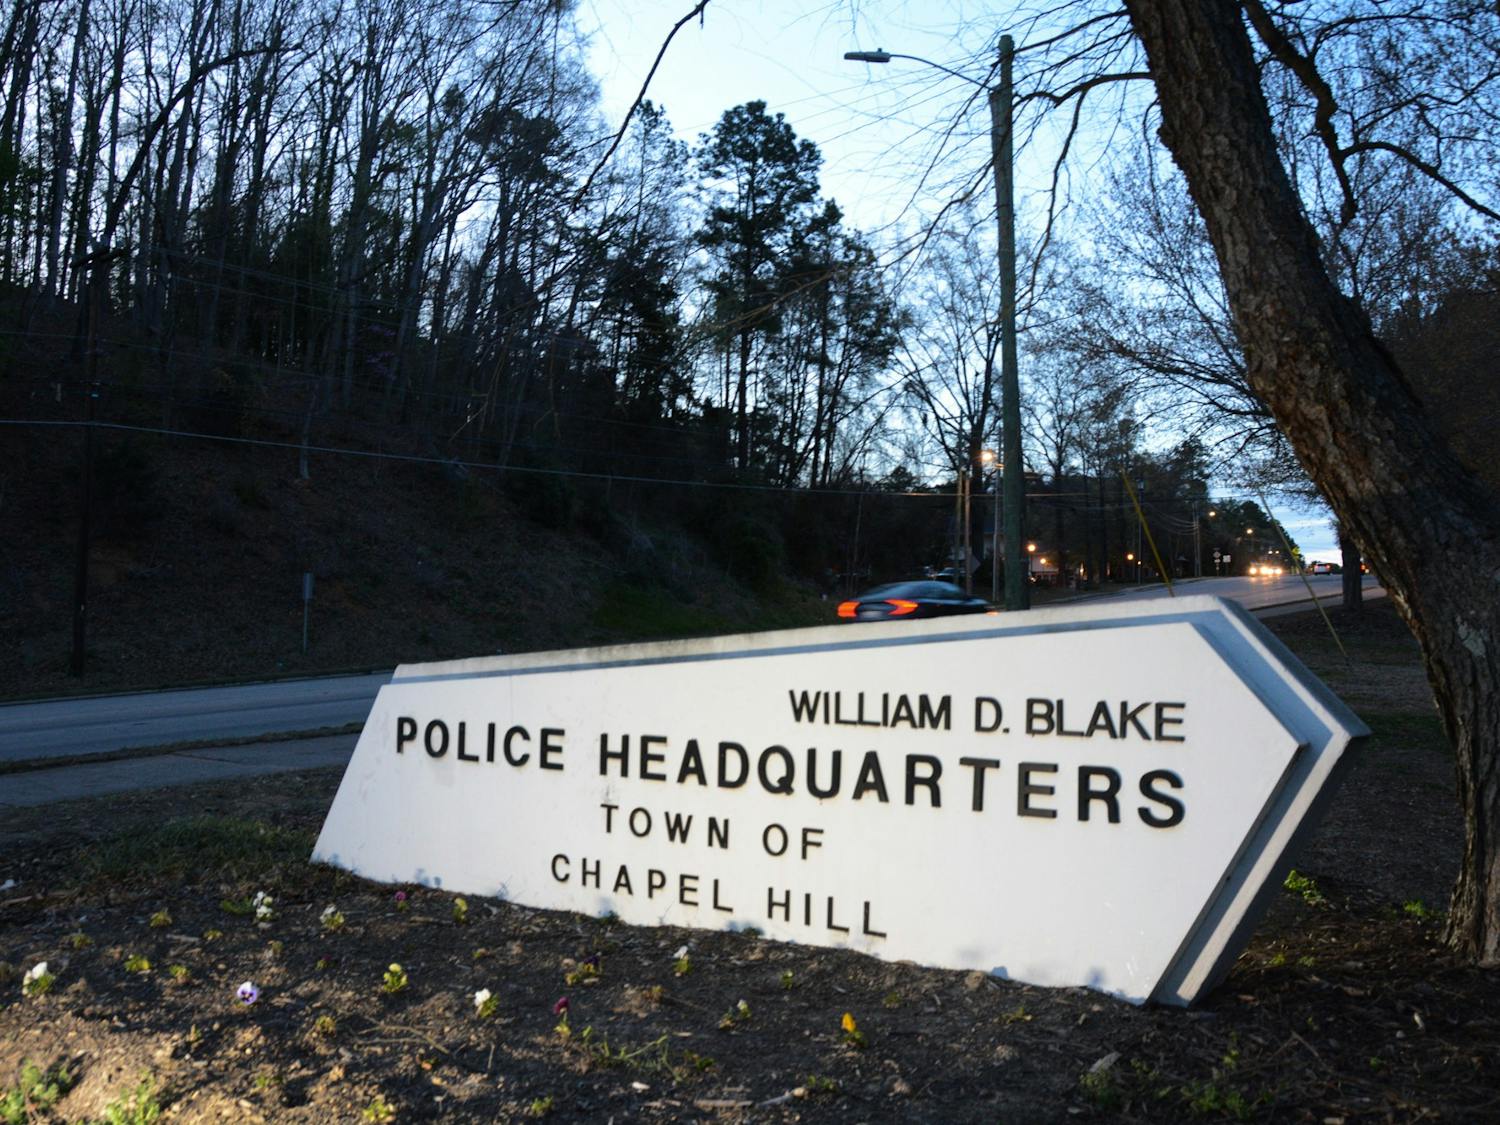 The sign at the entrance of the Chapel Hill Police headquarters is pictured on Wednesday, March 8.